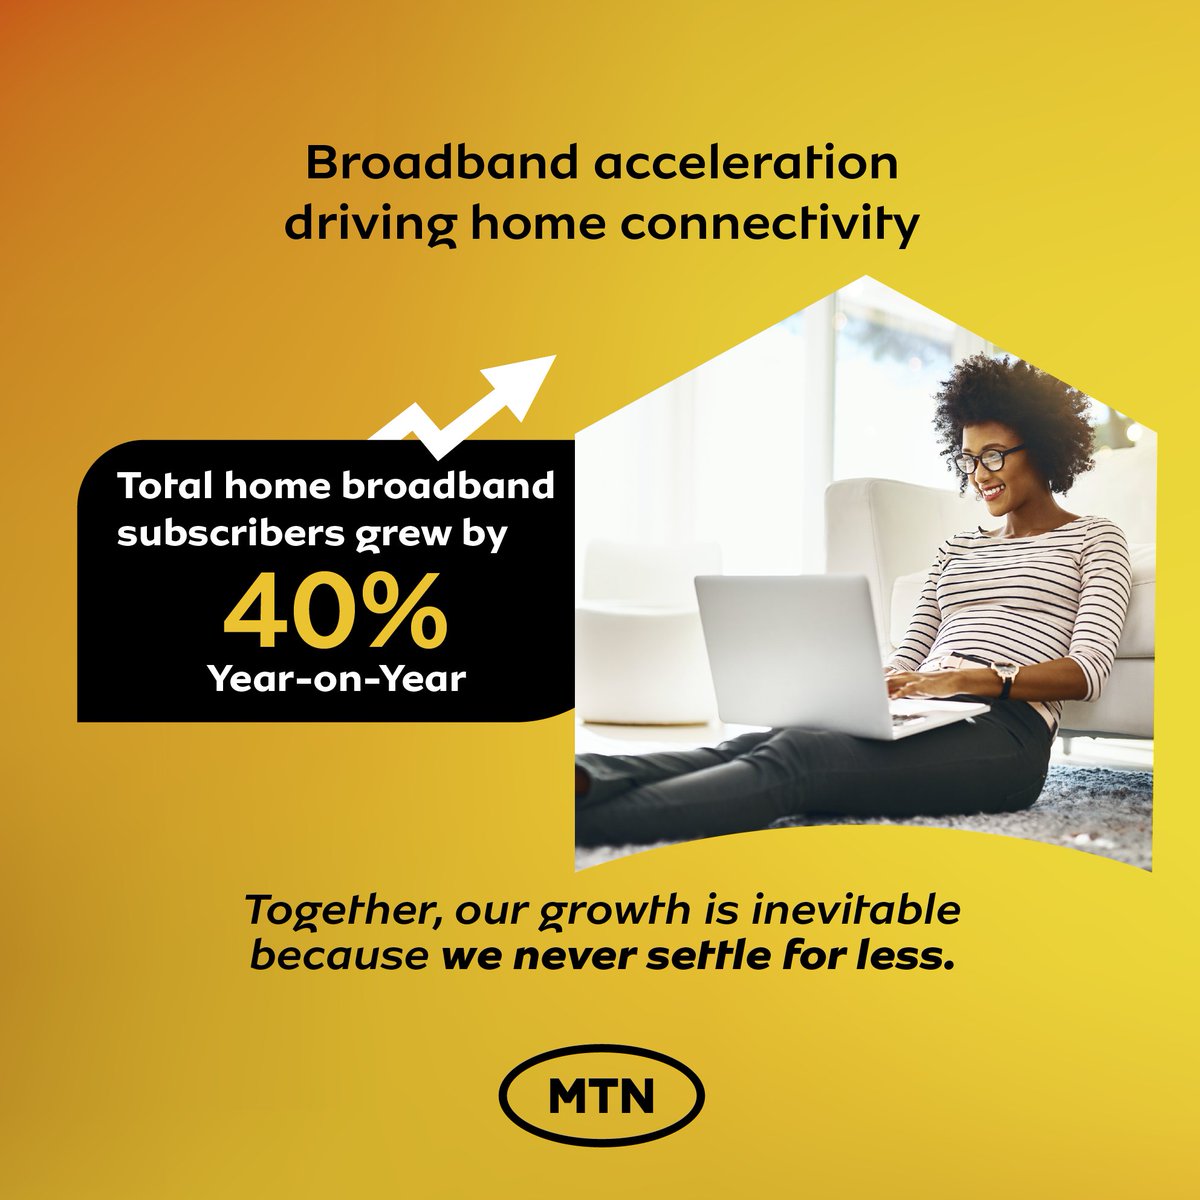 We registered tremendous growth in broadband subscribers driven by our continued investment in the fibre-to-the-home segment (FTTH), positioning MTN Rwanda as the home broadband provider of choice.

#DoingGoodTogether